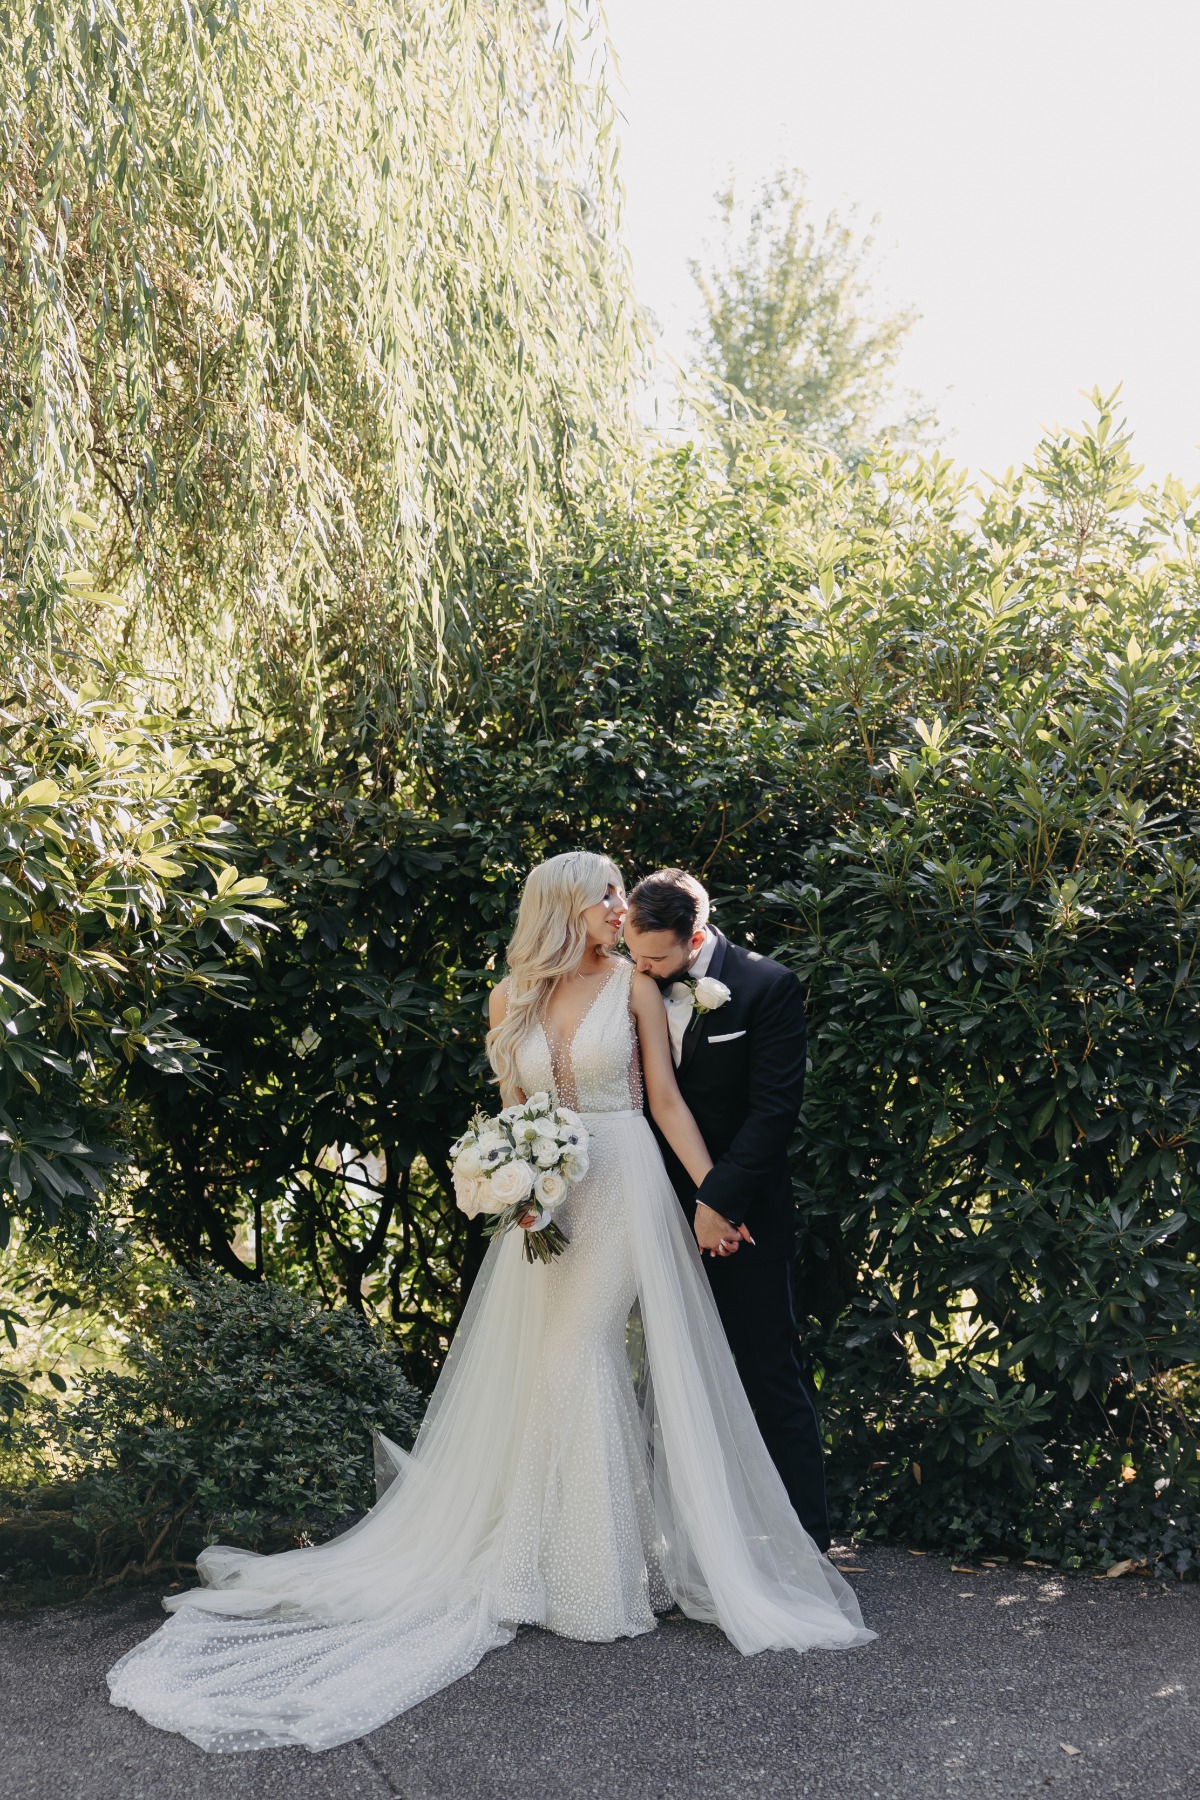 This garden wedding brought mocktails to Washington wine country